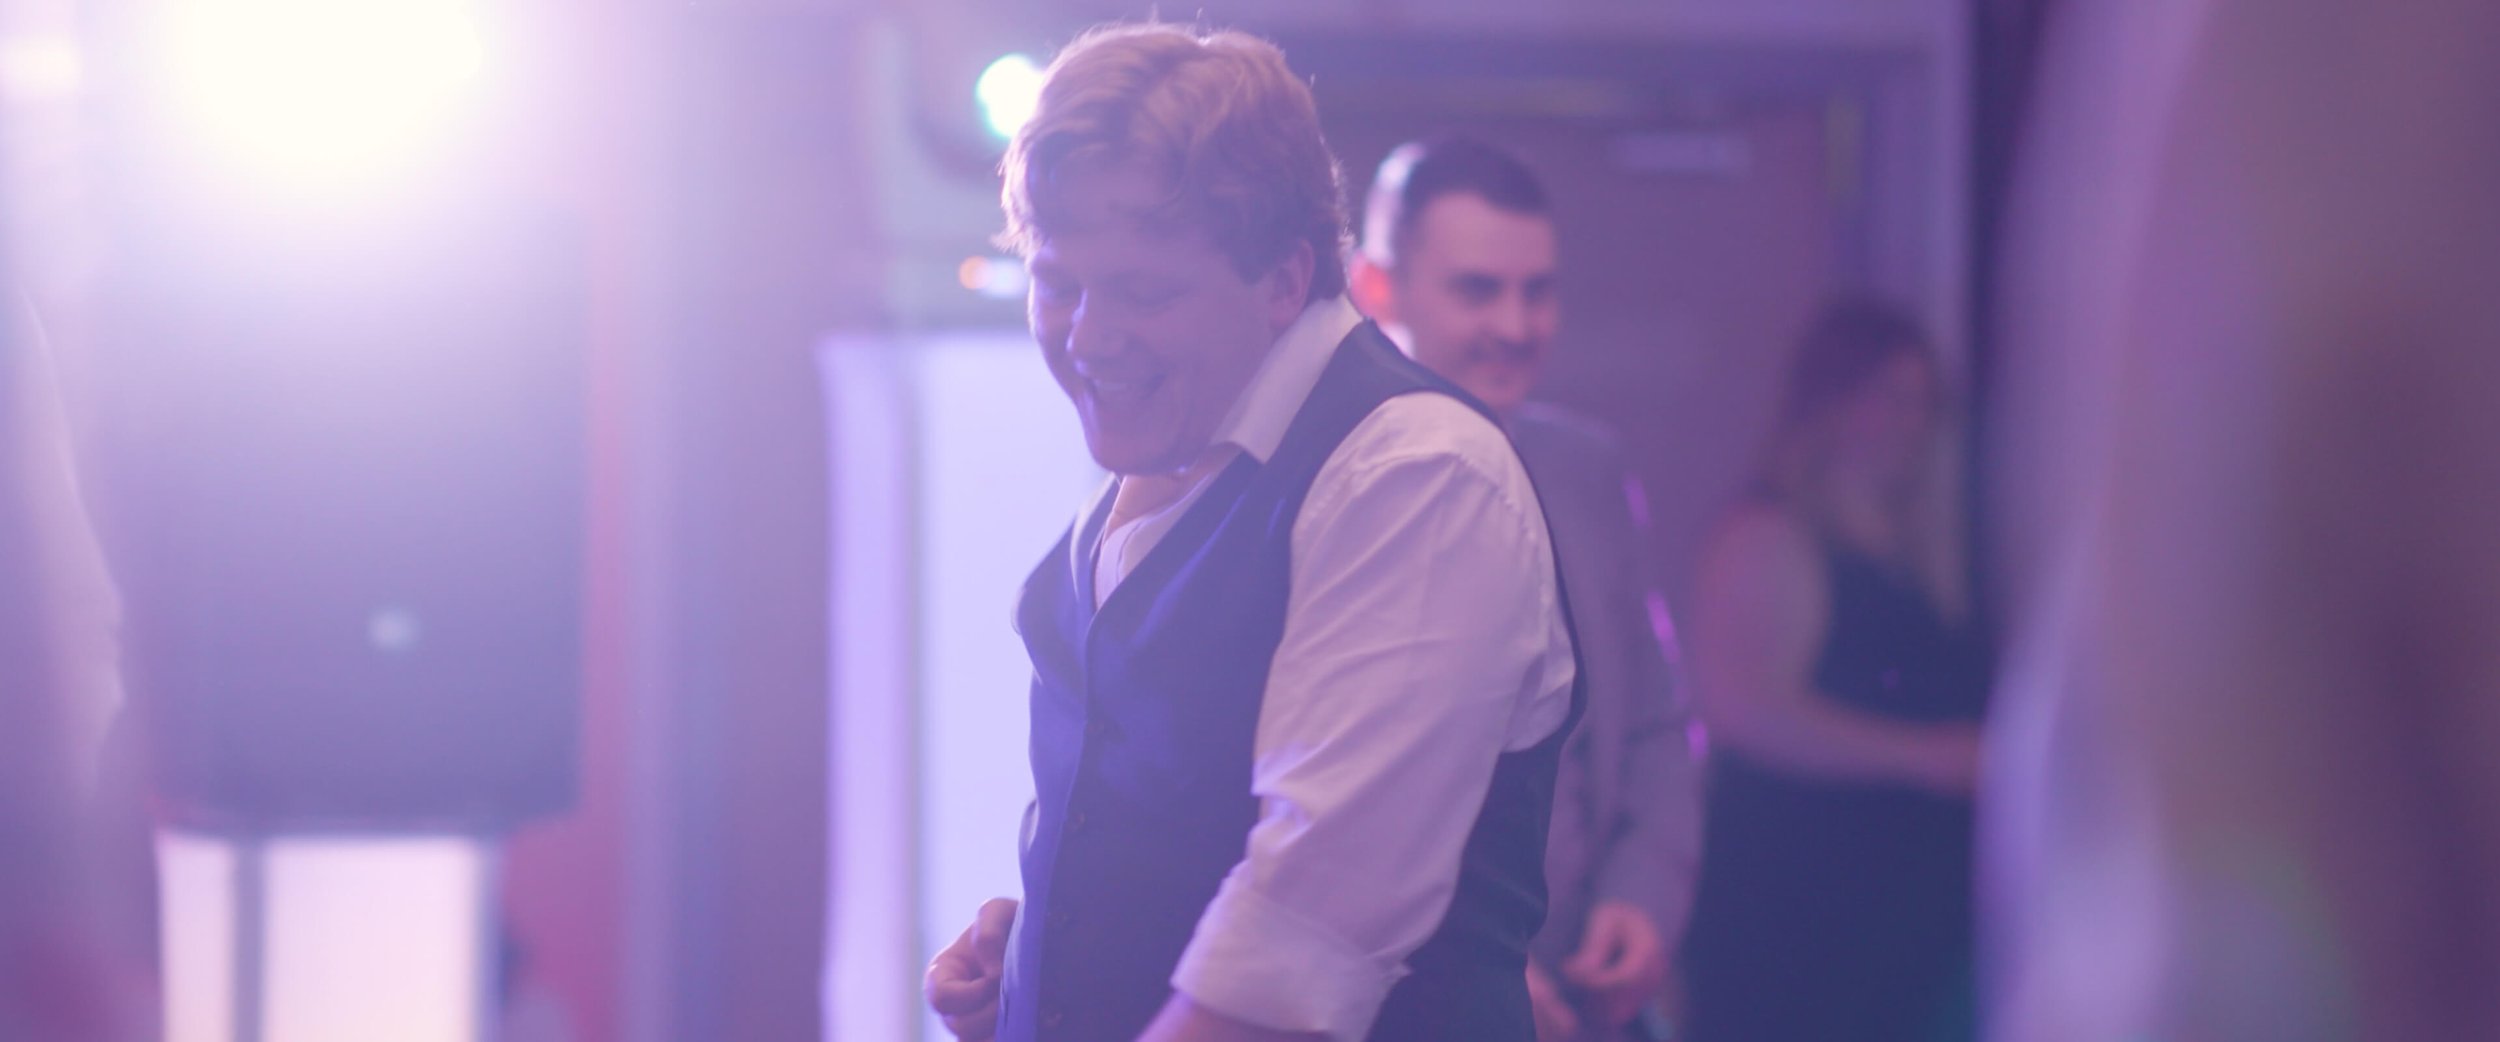 Dael pulling off some impressive dance moves as the wedding DJ's light shines on him.